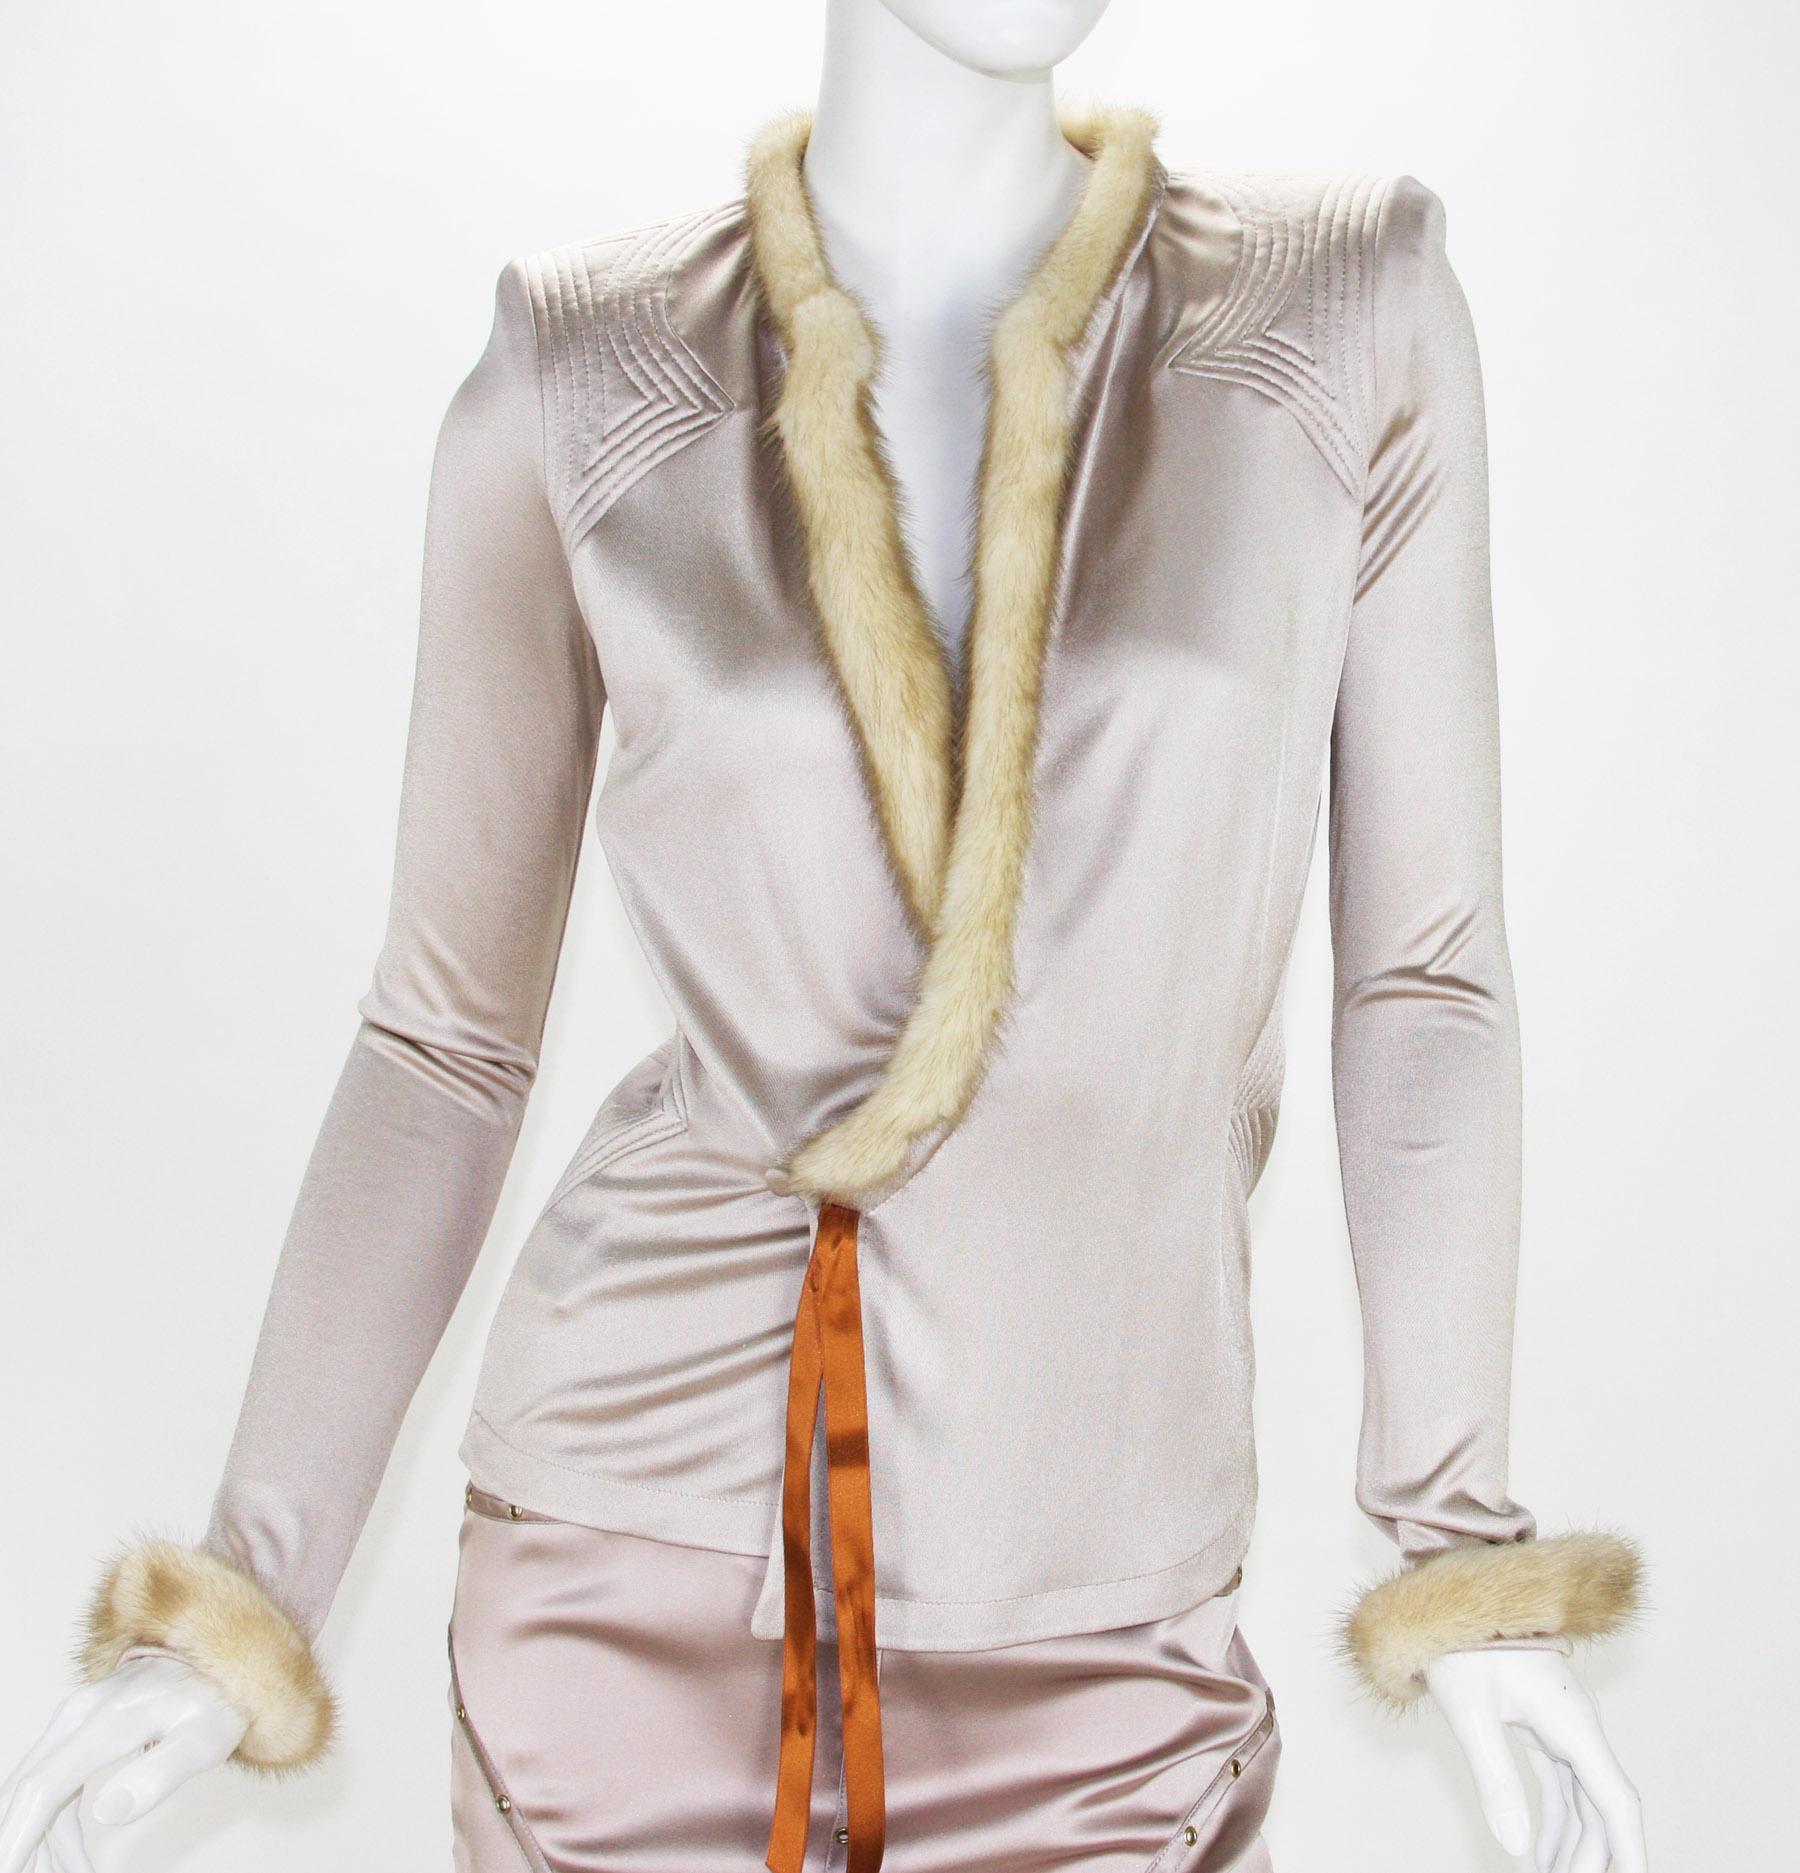 Tom Ford for Gucci and Yves Saint Laurent Nude Silk Mink Skirt Suit It. 40  US 4 For Sale 2